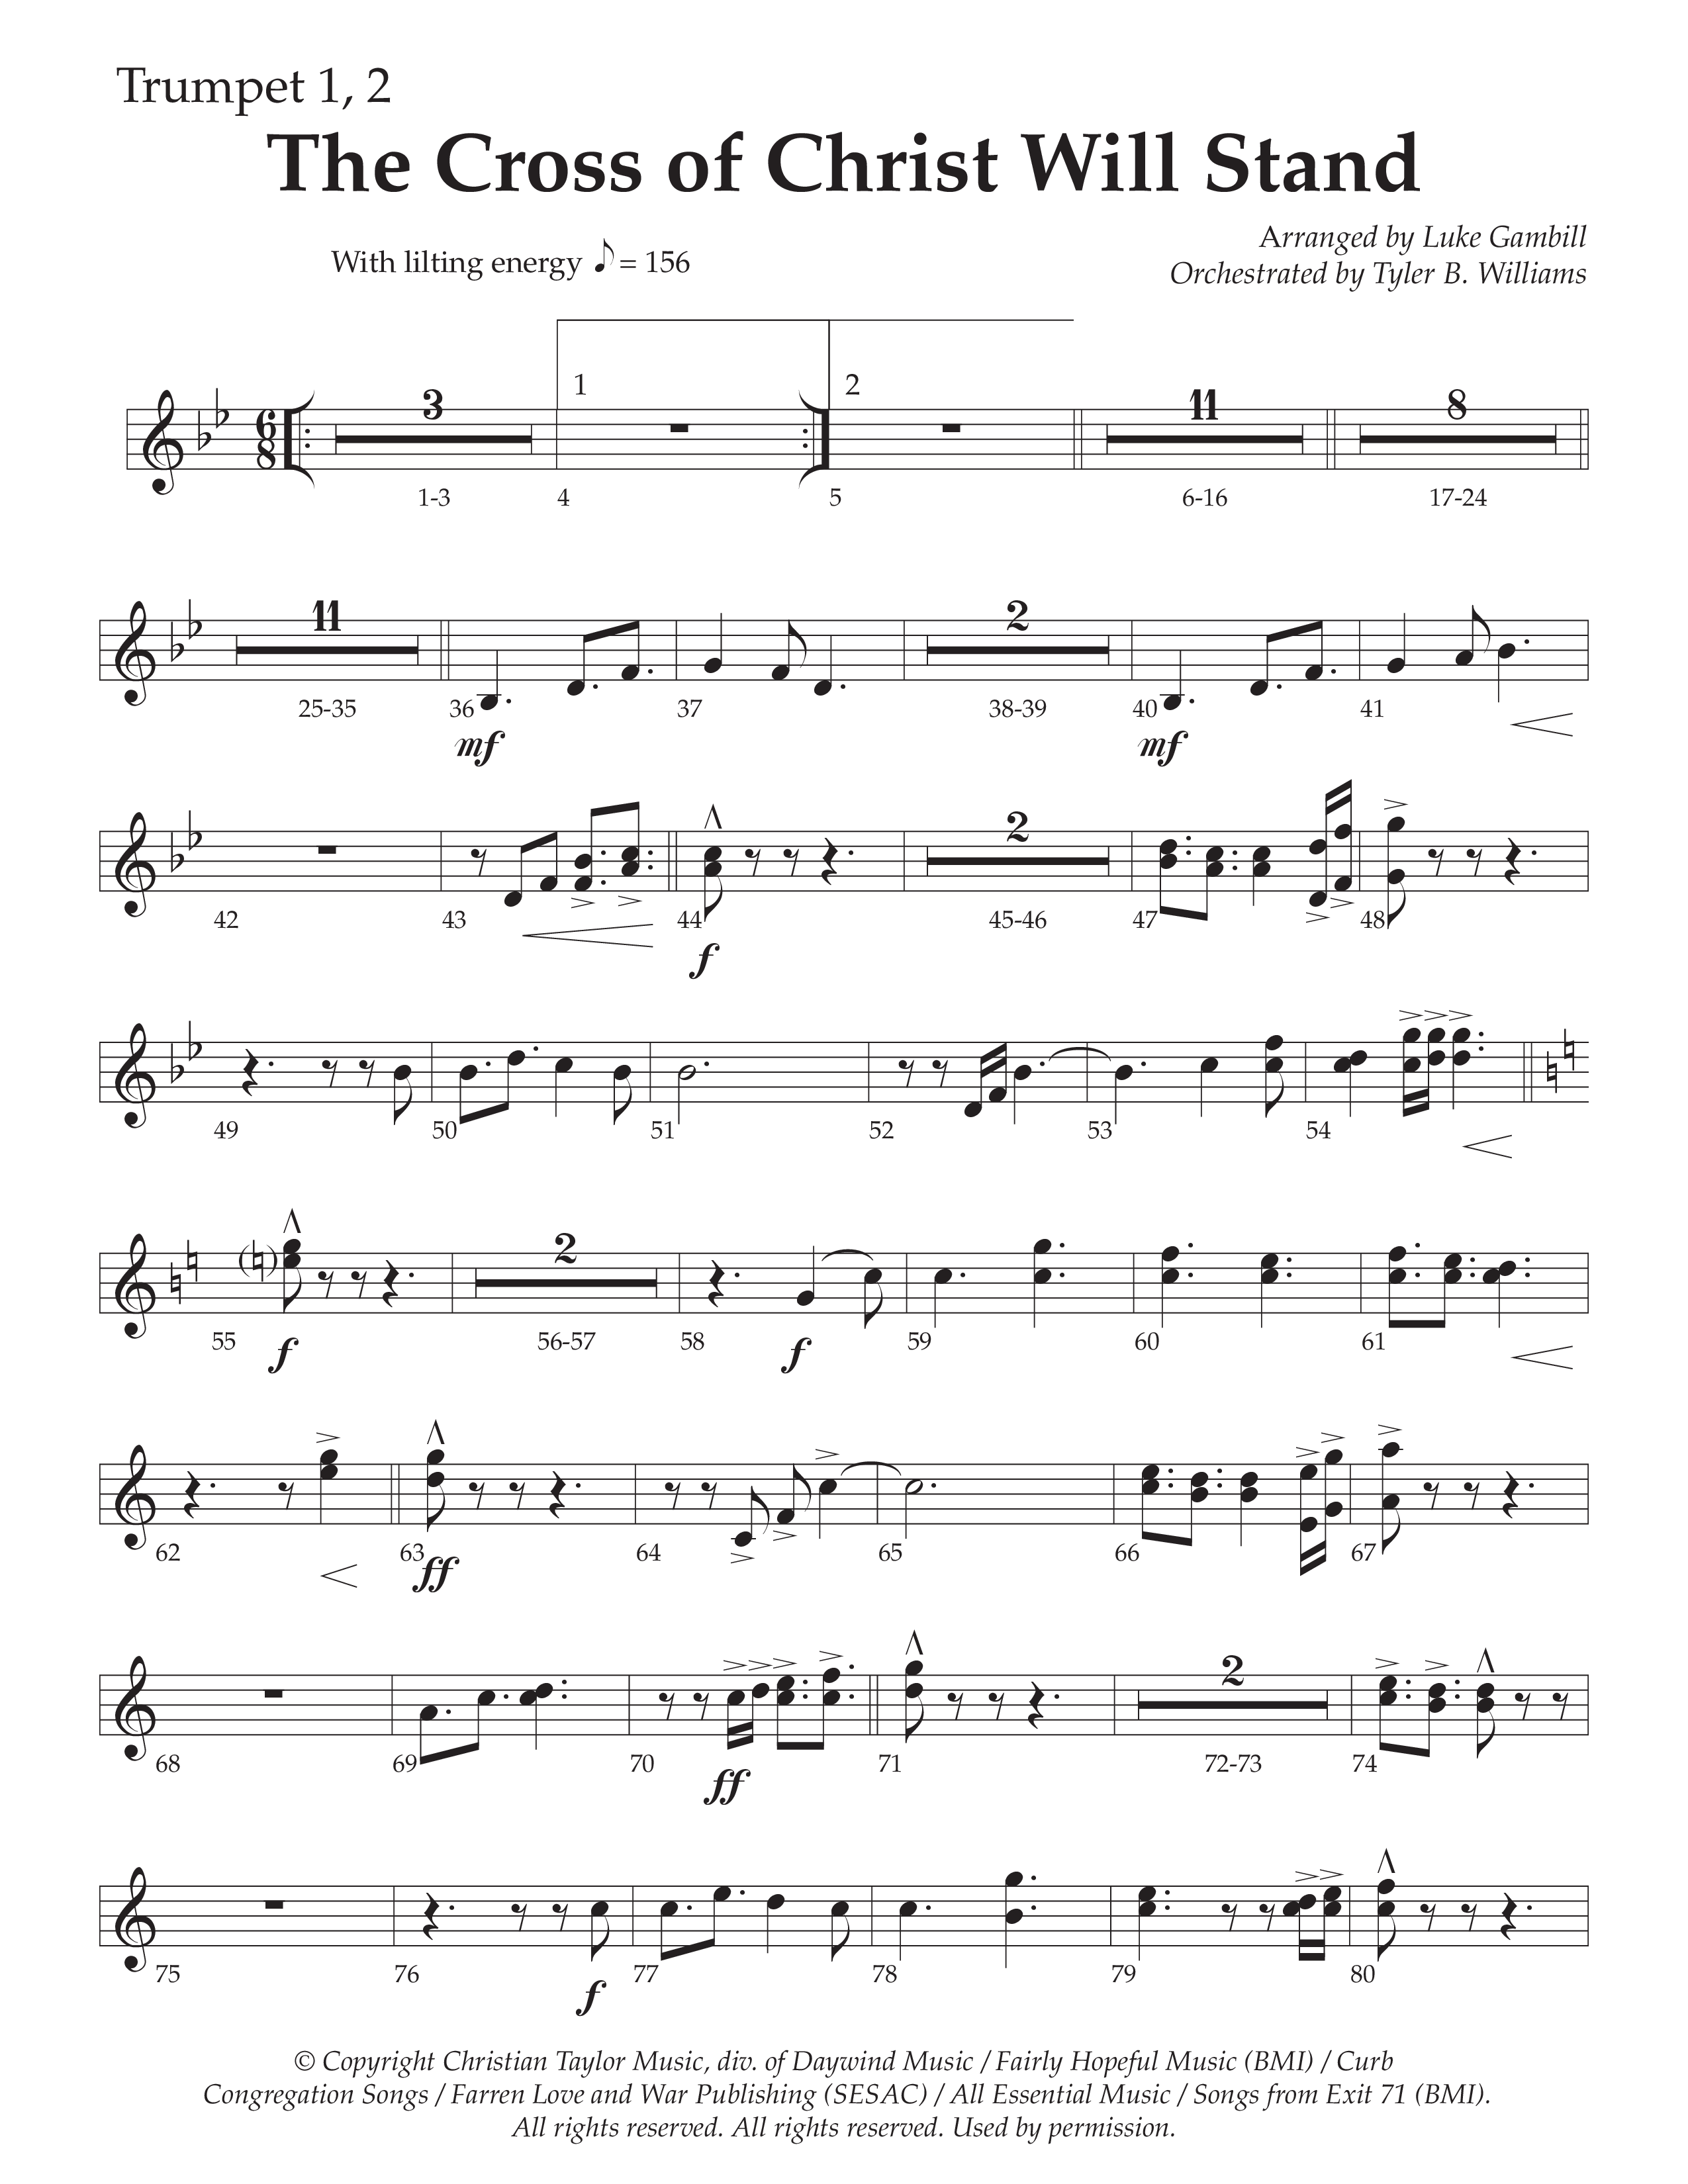 The Cross of Christ Will Stand (Choral Anthem SATB) Trumpet 1,2 (Daywind Worship / Arr. Luke Gambill)